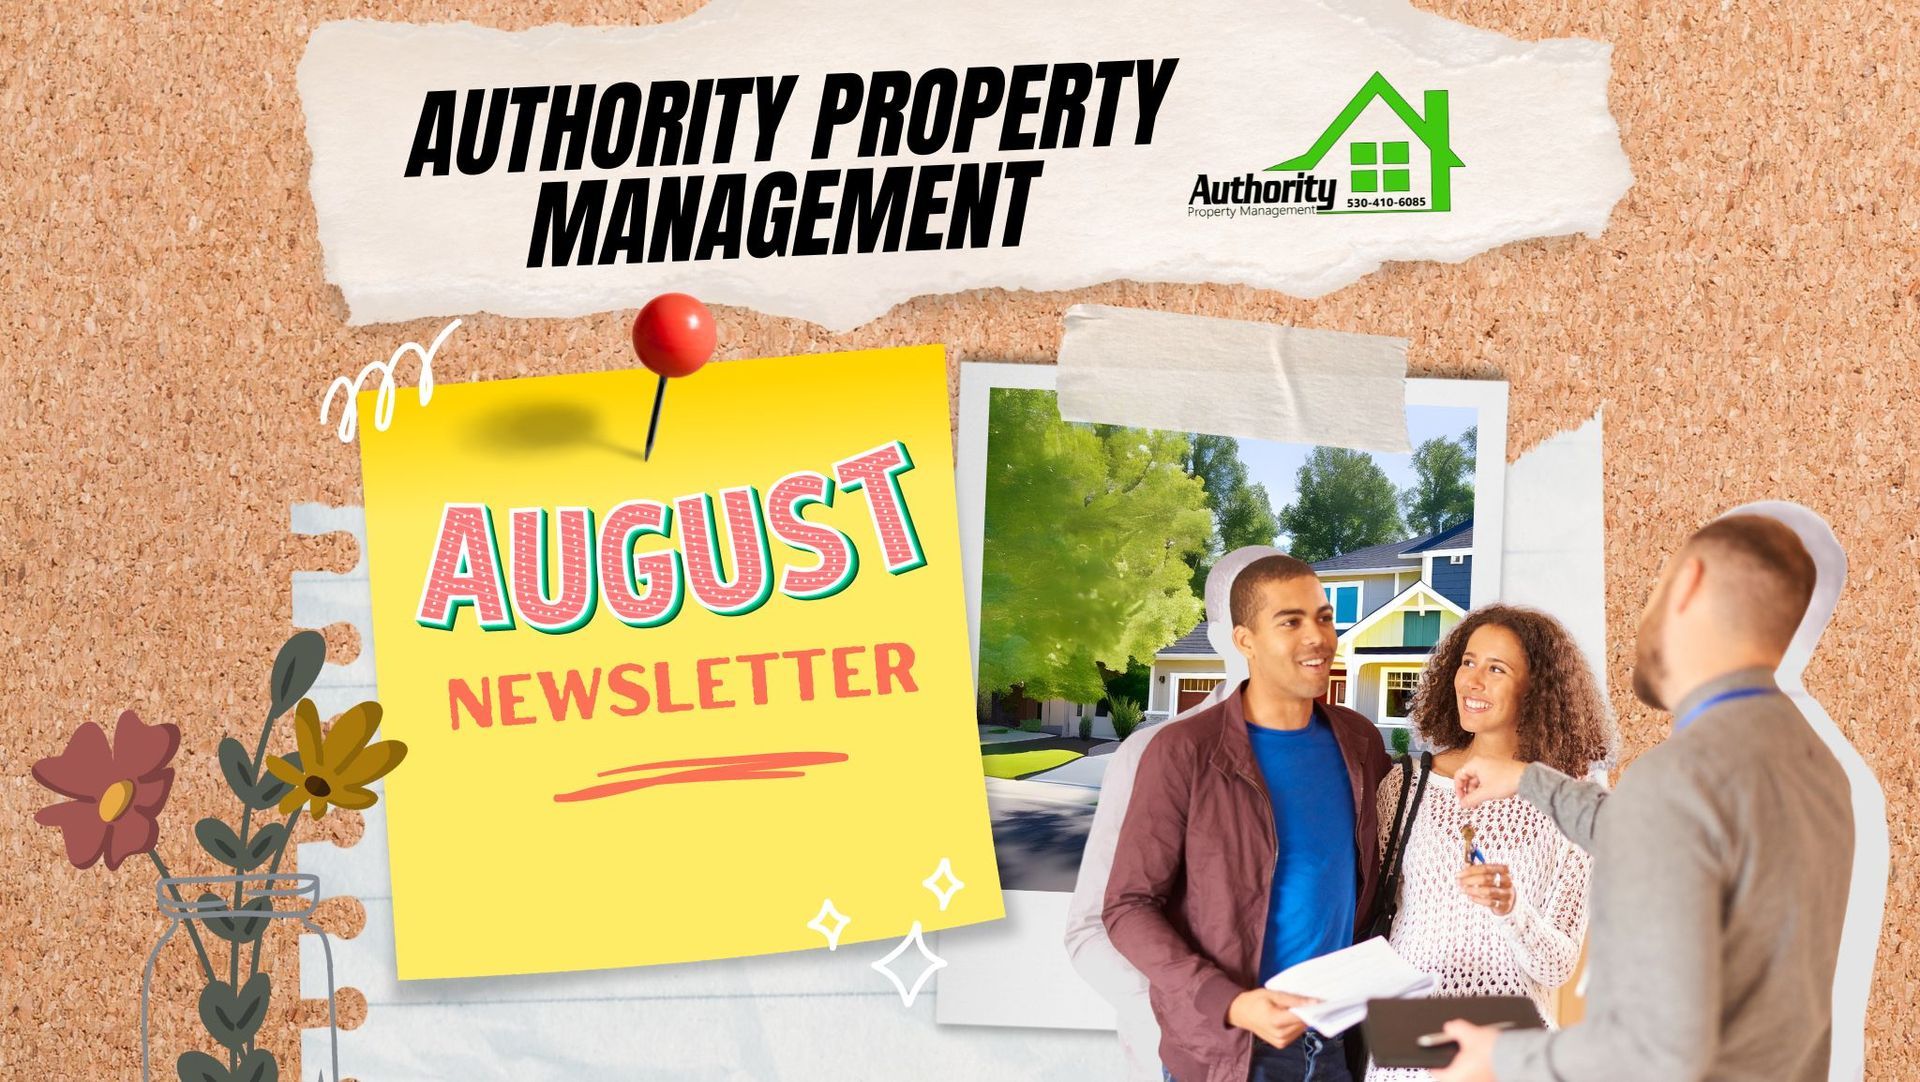 Collage with 'August Newsletter,' Authority Property Management logos, and a photo of a smiling couple talking to a man by a house.
